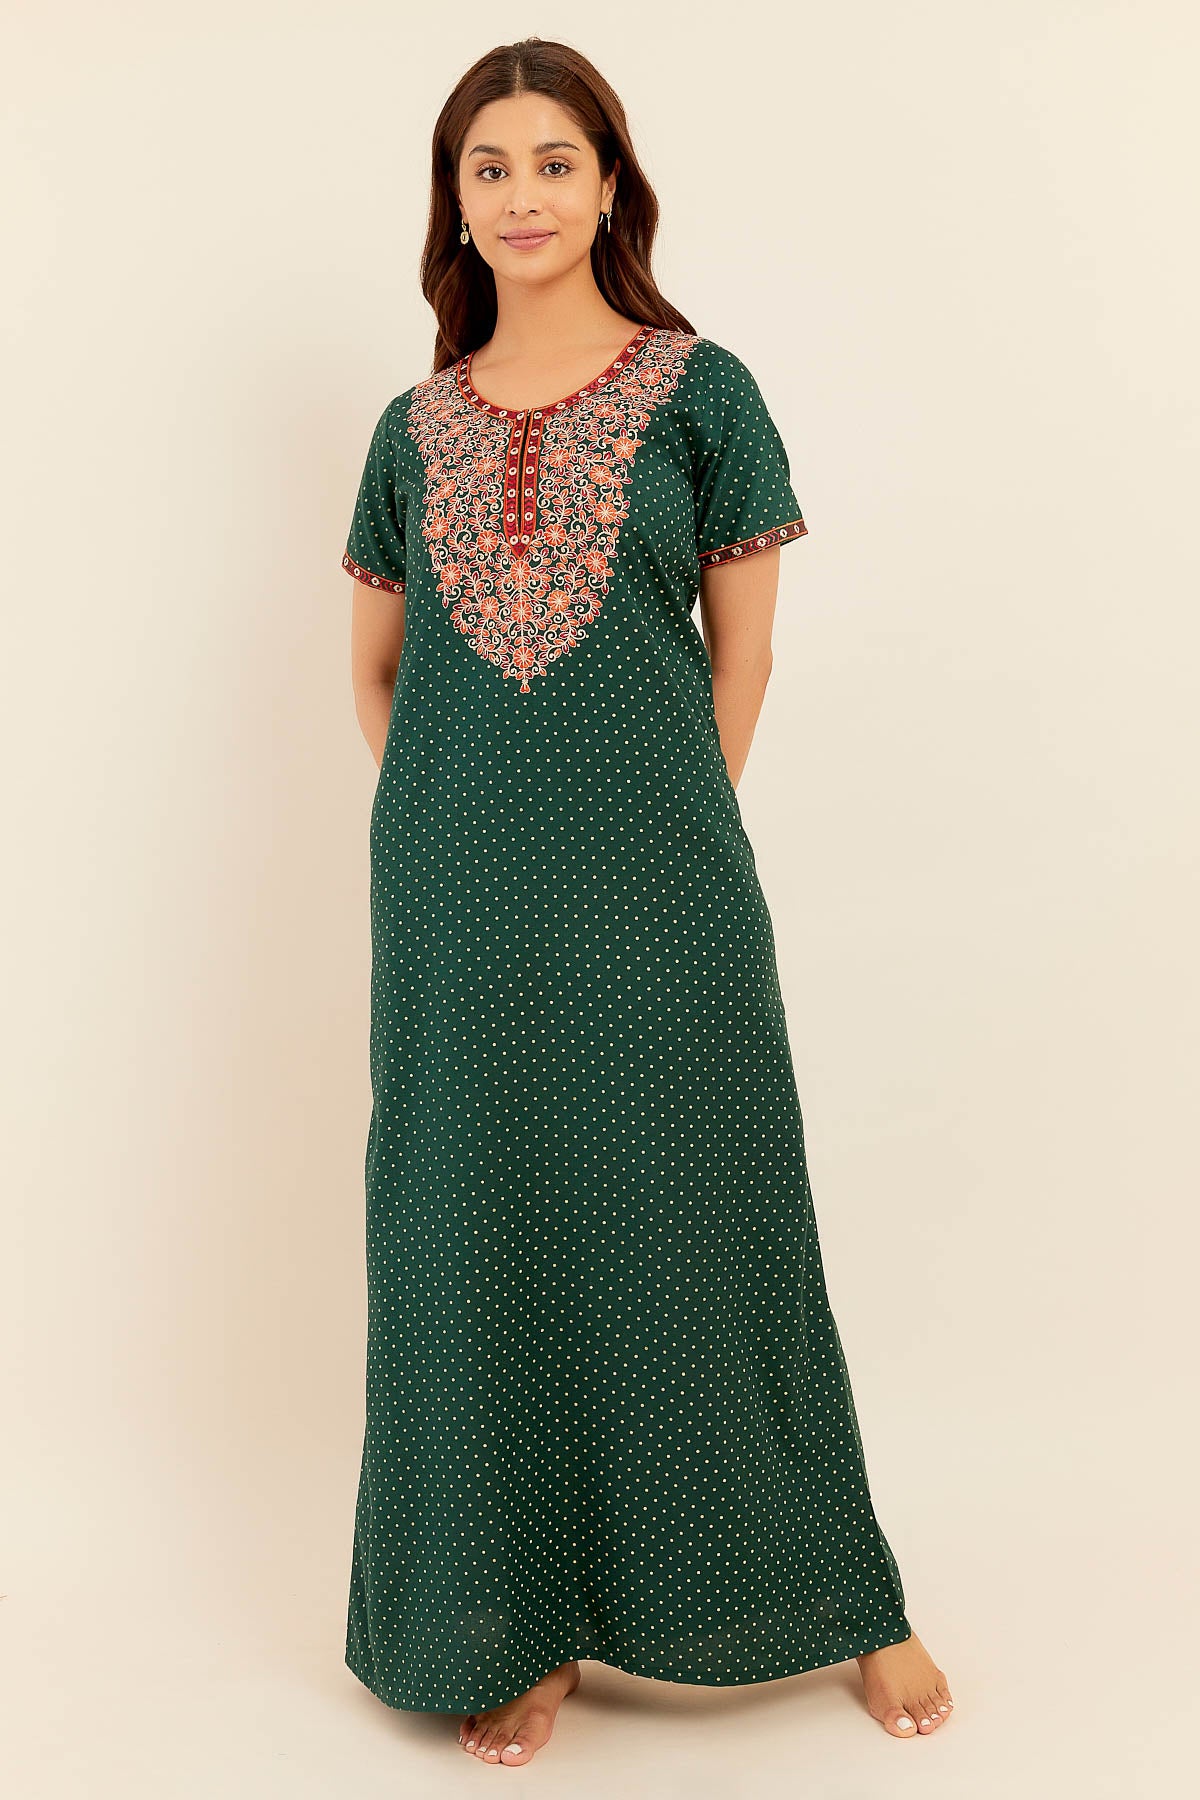 Allover Polka Dotted With Floral Embroidered Yoke Nighty - Green